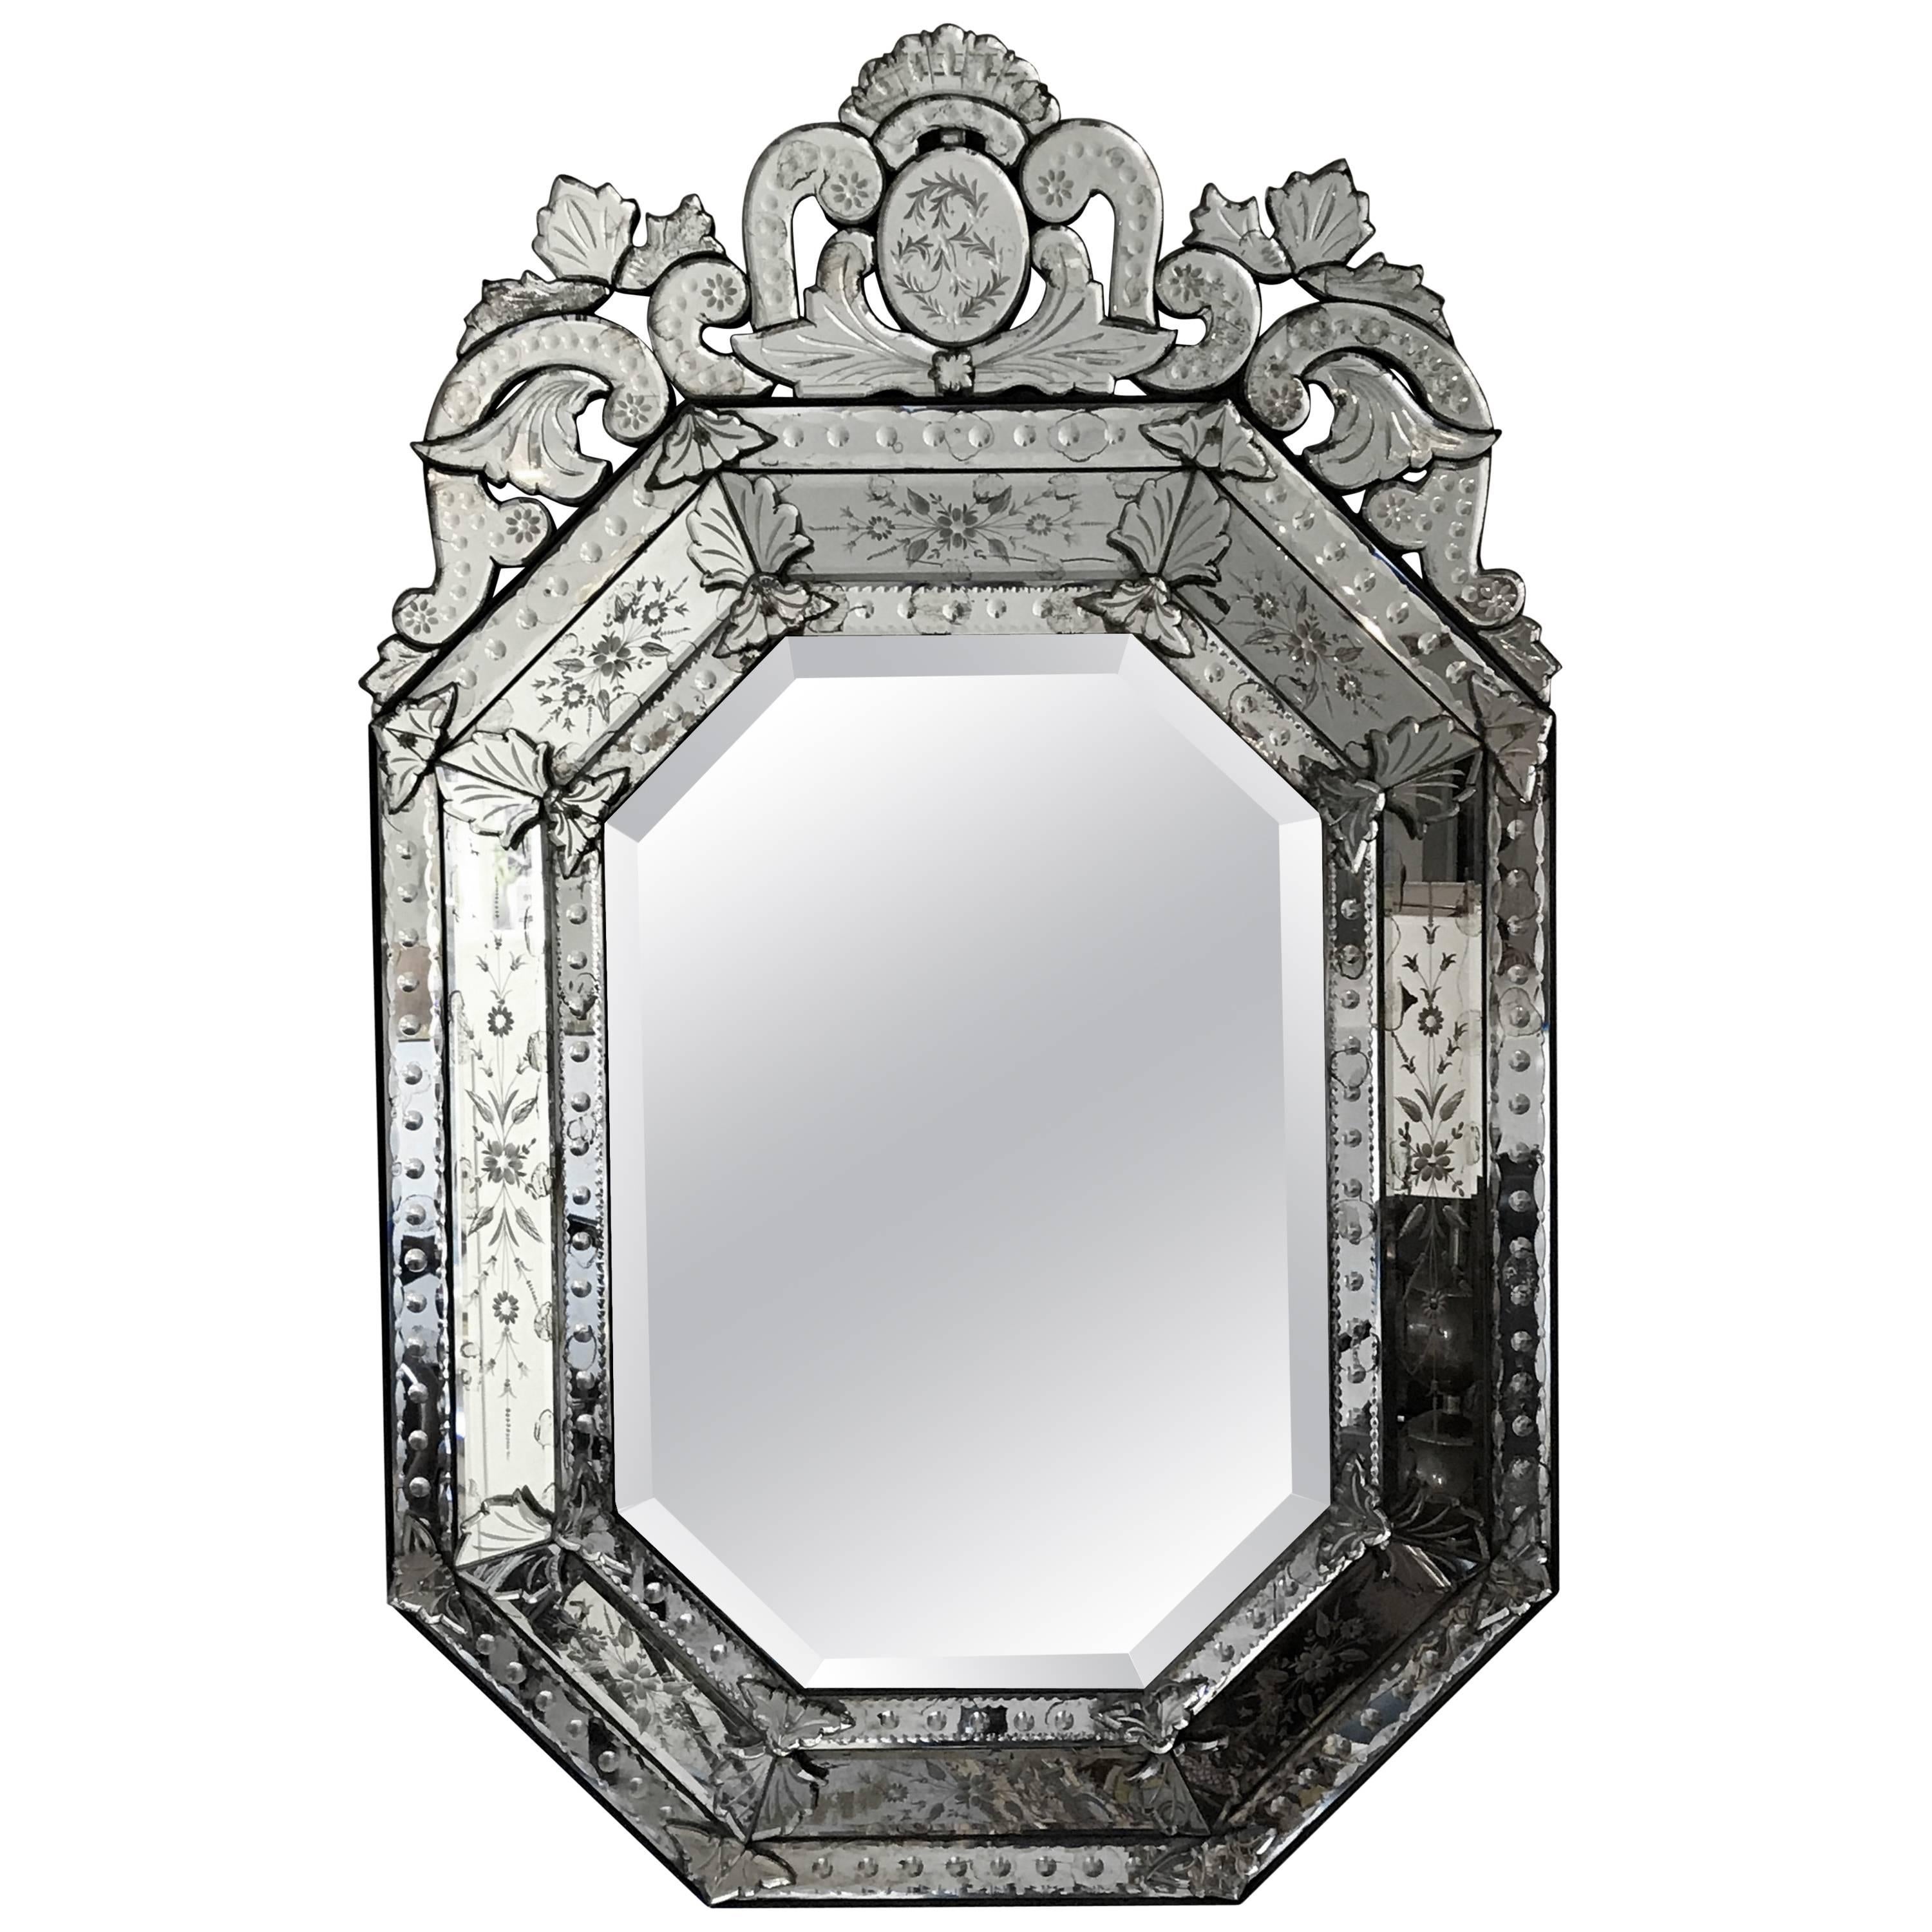 Massive Italian Venetian Mirror, Hand Etched, Octagon Shaped, Early 20th Century